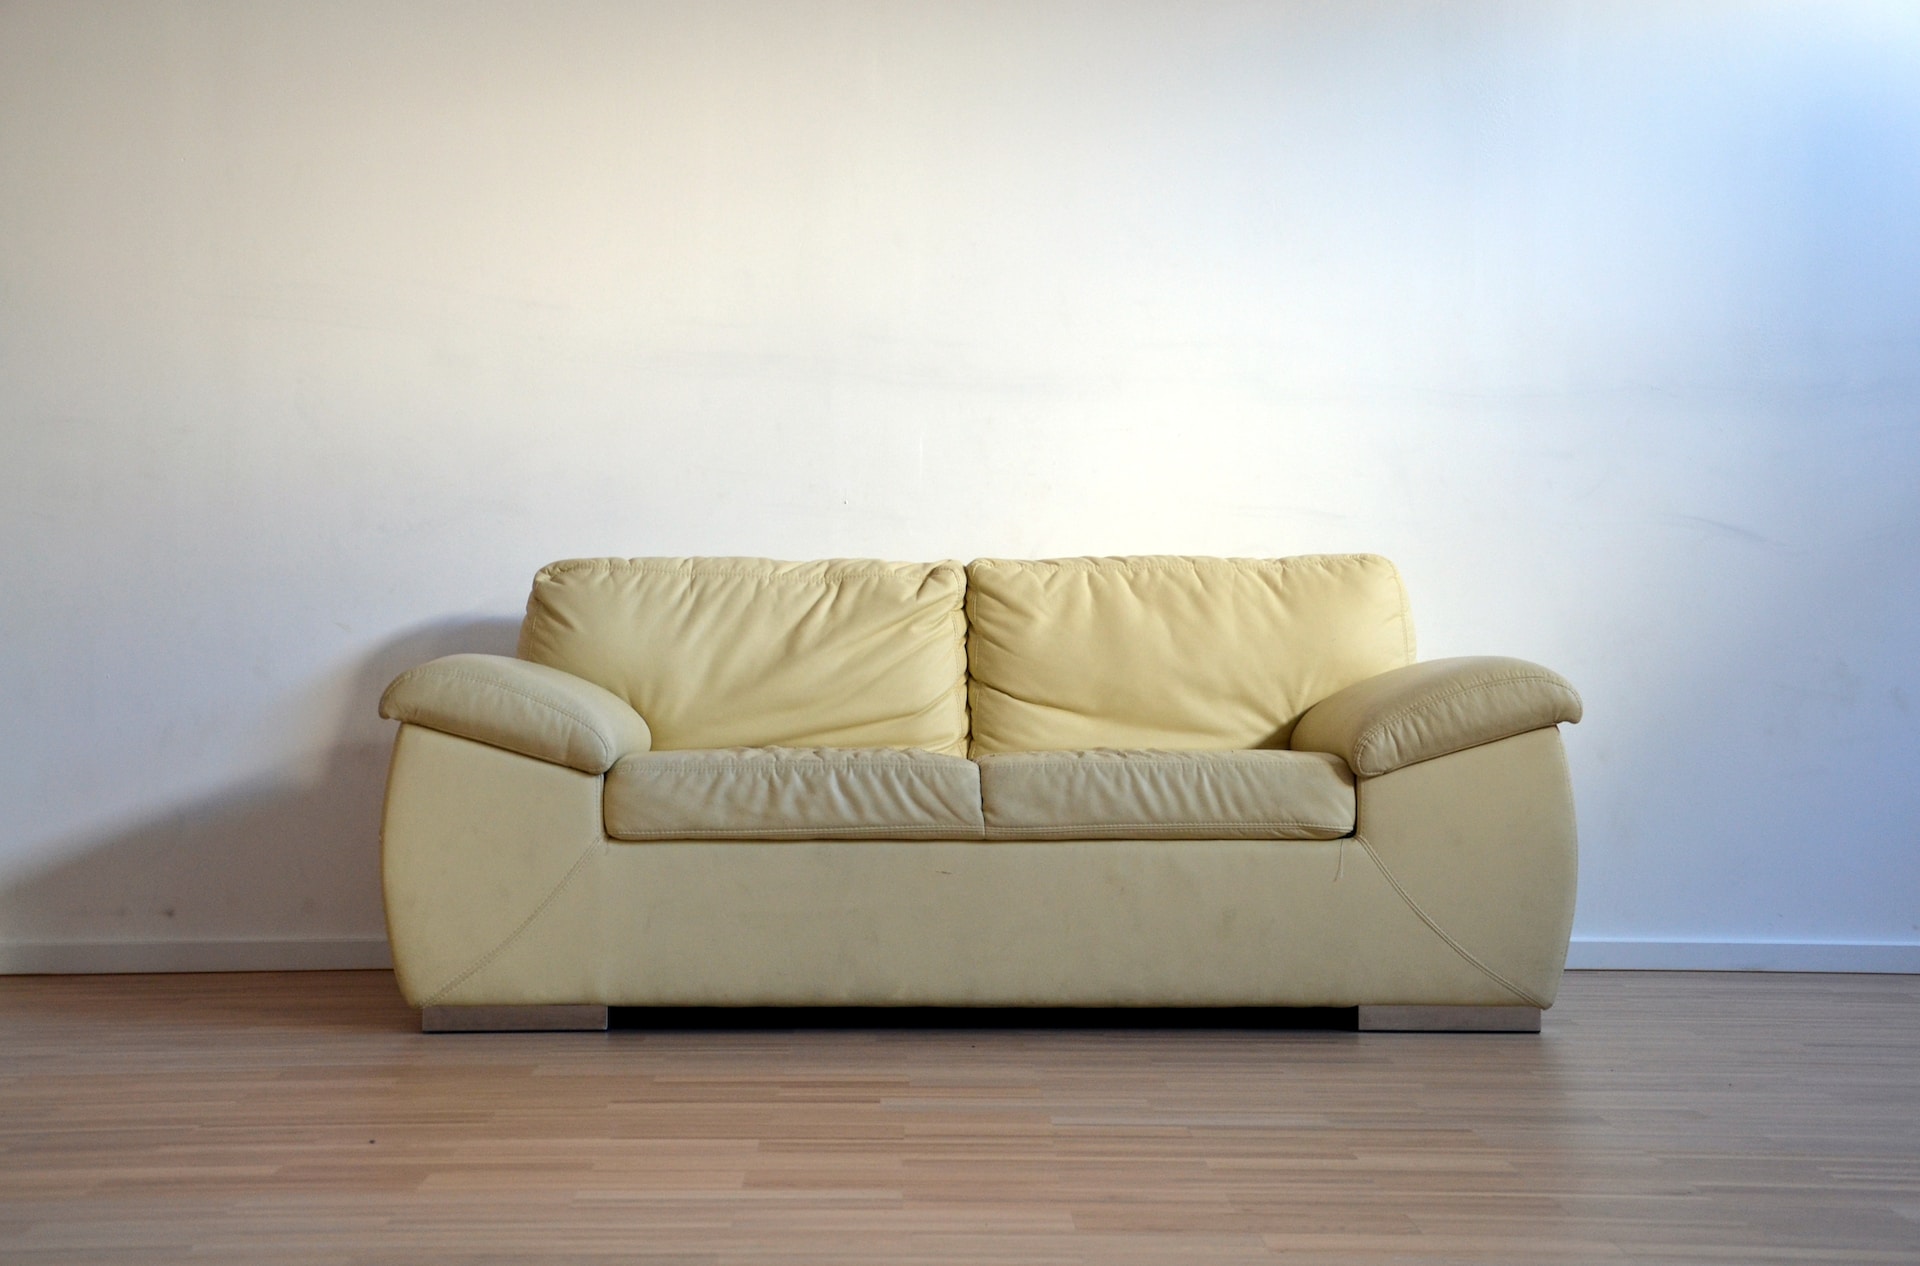 How to Clean a Polyester Couch